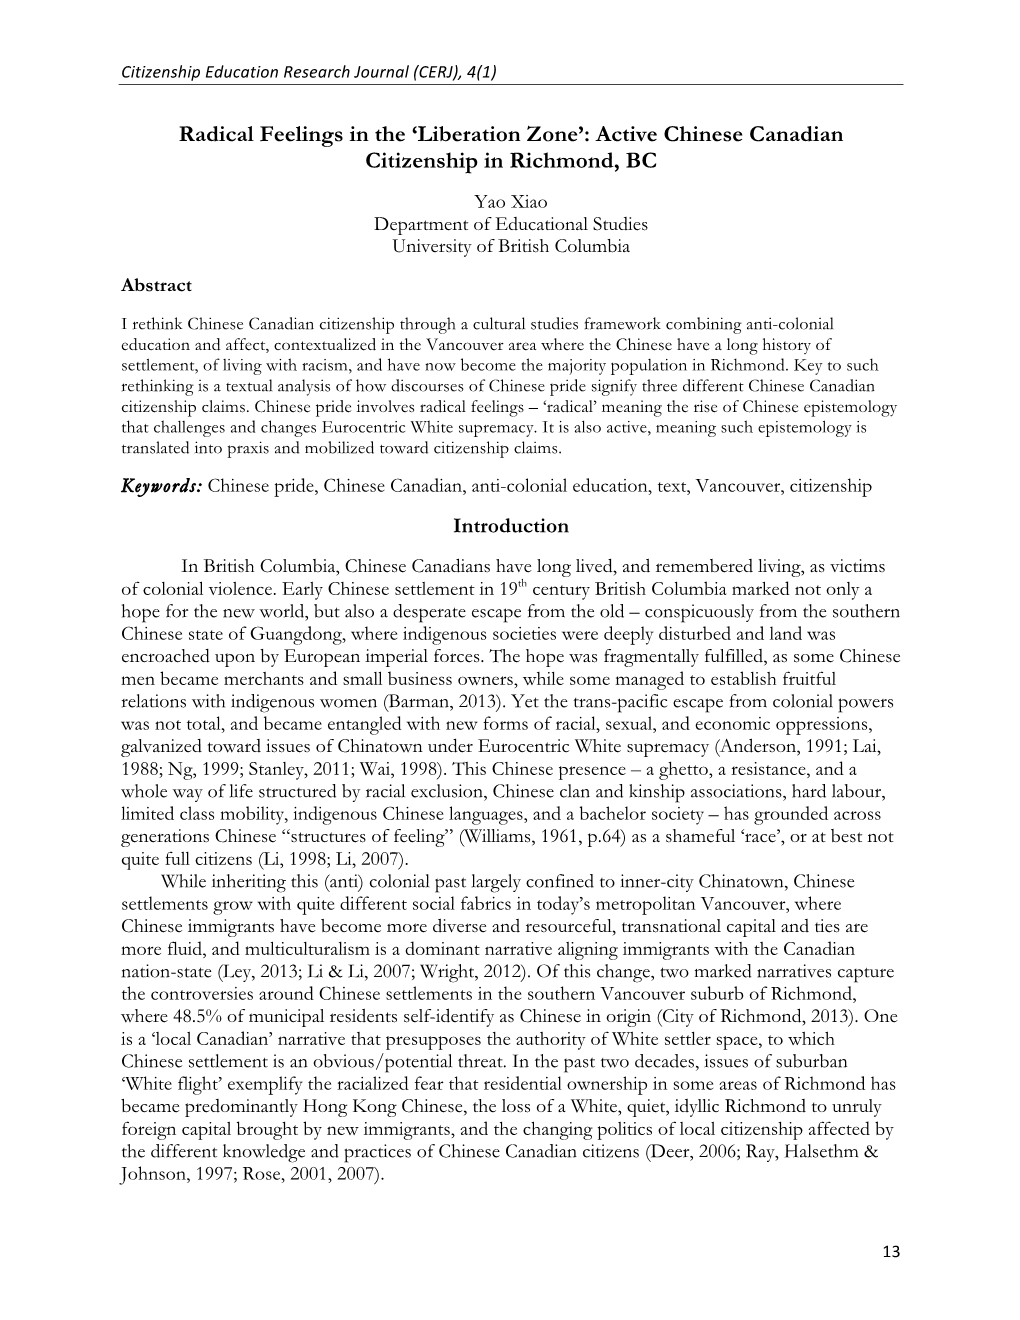 Active Chinese Canadian Citizenship in Richmond, BC Yao Xiao Department of Educational Studies University of British Columbia